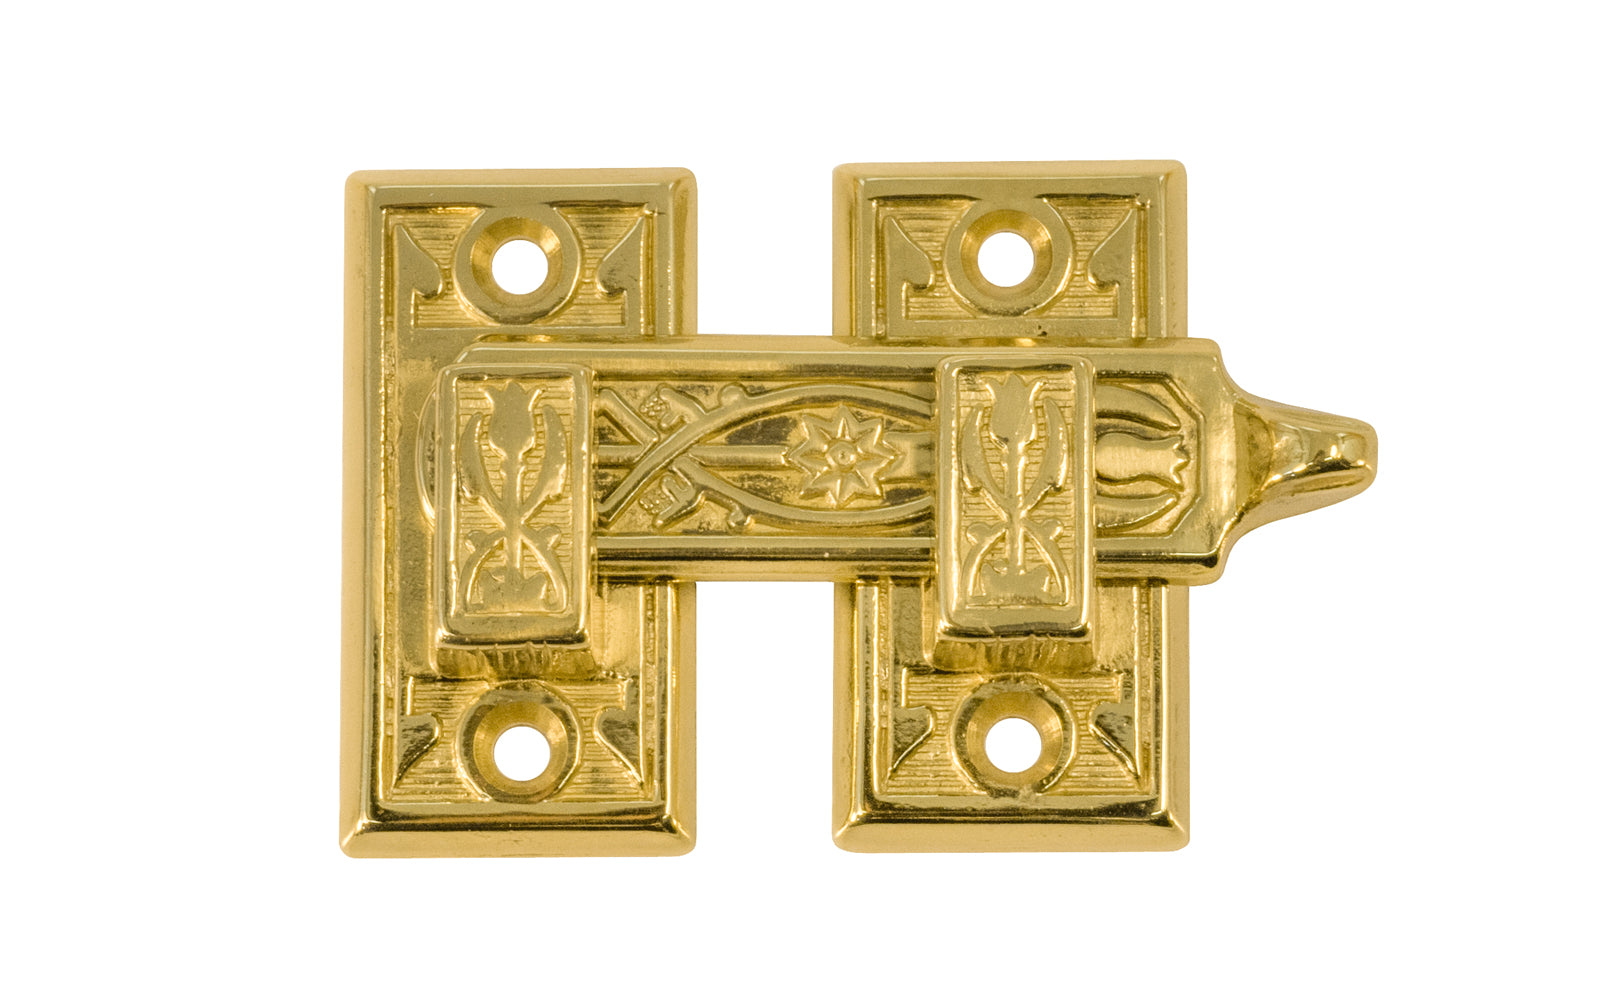 Vintage-style Hardware · Classic & traditional ornate style shutter bar made of solid brass material. Designed for interior window shutters, but it may be used on cabinet doors, bi-fold doors, pantry doors, windows, small doors. Victorian Style, Eastlake style hardware. Lacquered brass finish.